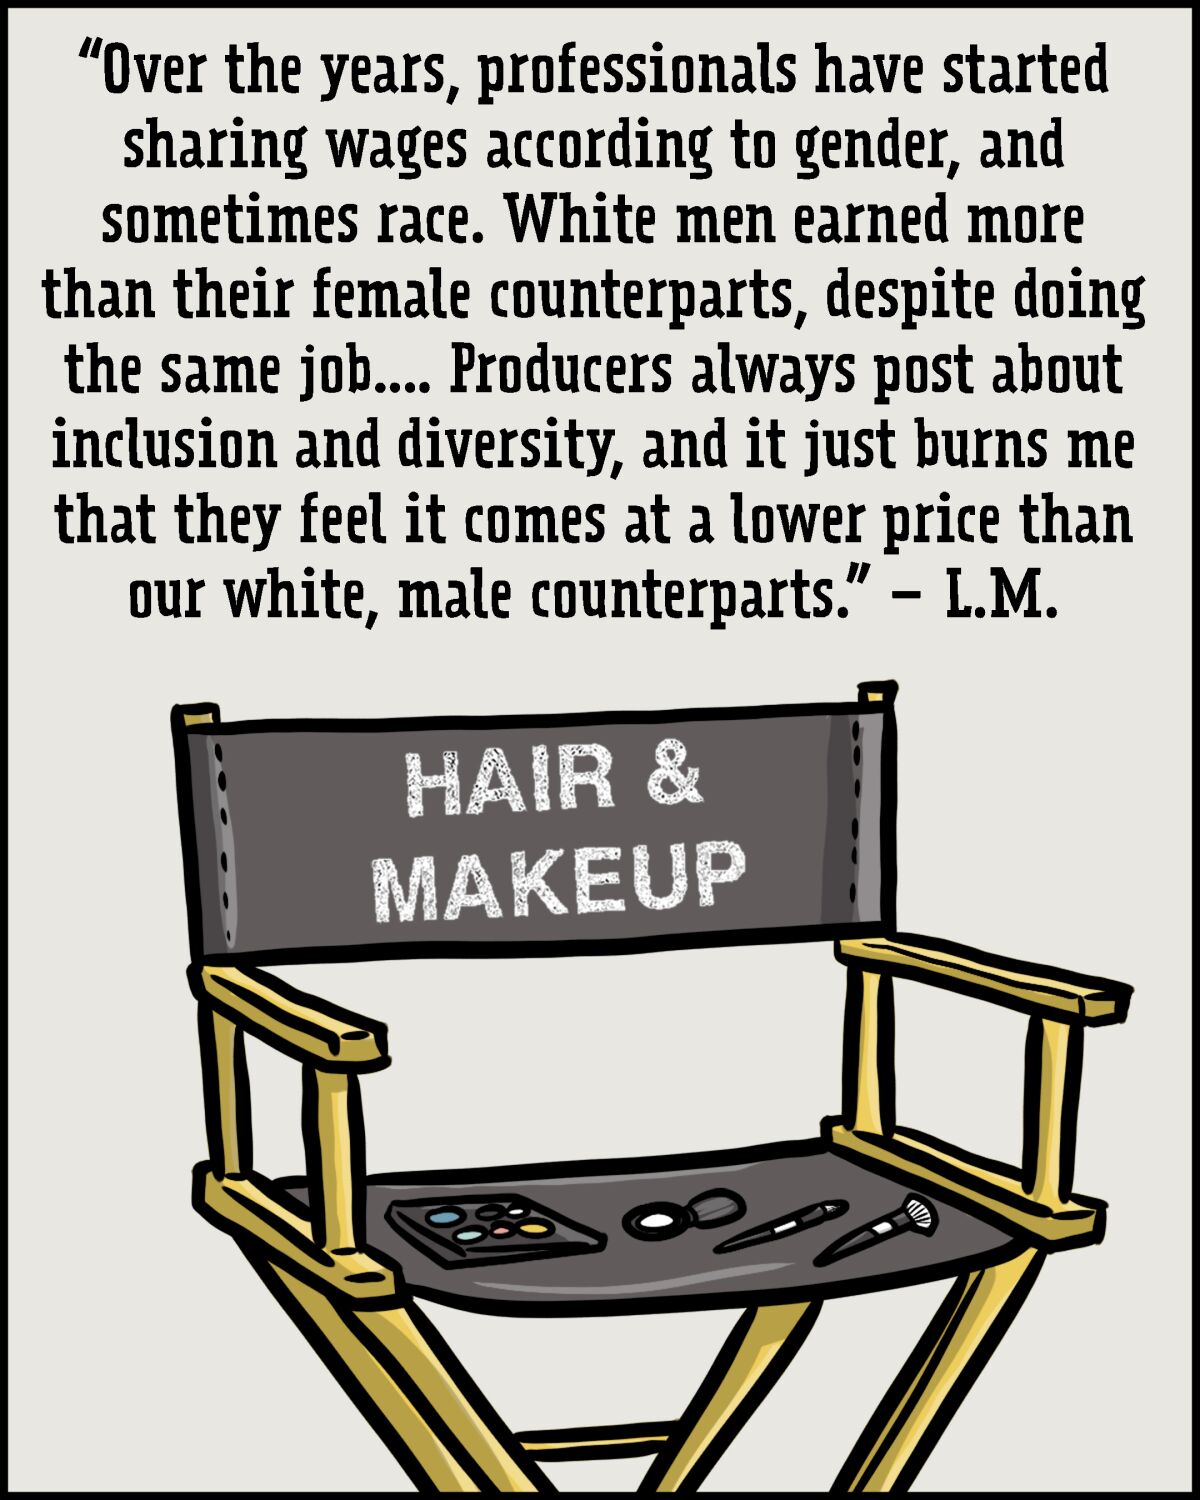 An illustration of a director's chair labeled "hair & makeup" with tools of the trade on the seat. 